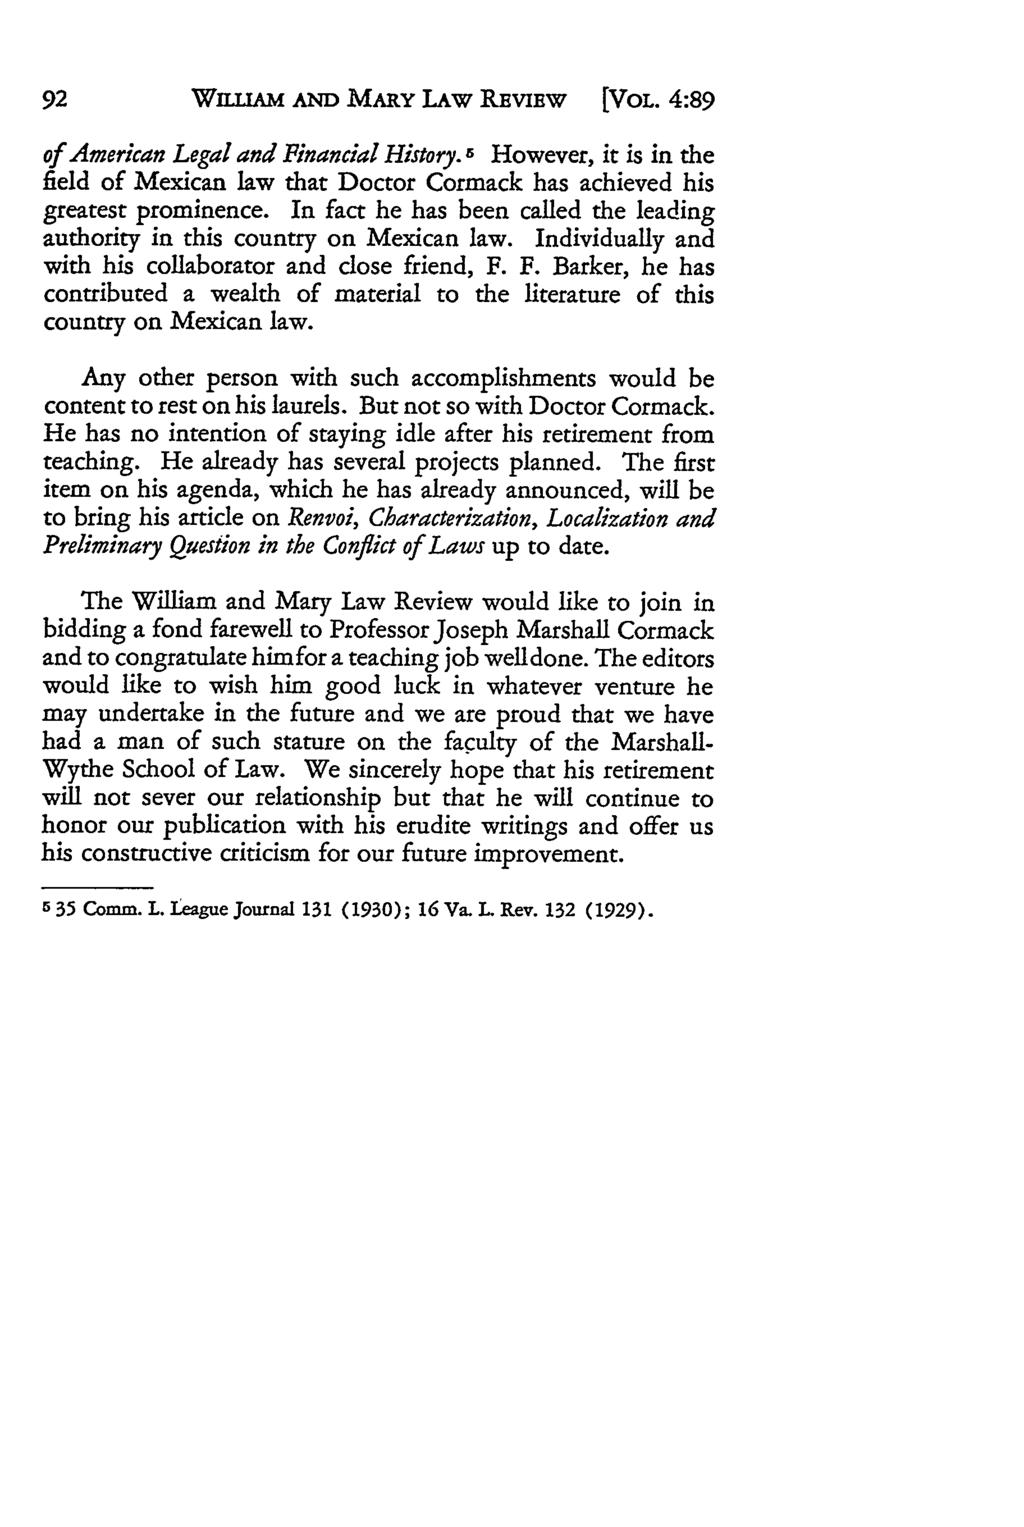 WILLIAM AND MARY LAW REVIEW [VOL. 4:89 of American Legal and Financial History. 5 However, it is in the field of Mexican law that Doctor Cormack has achieved his greatest prominence.